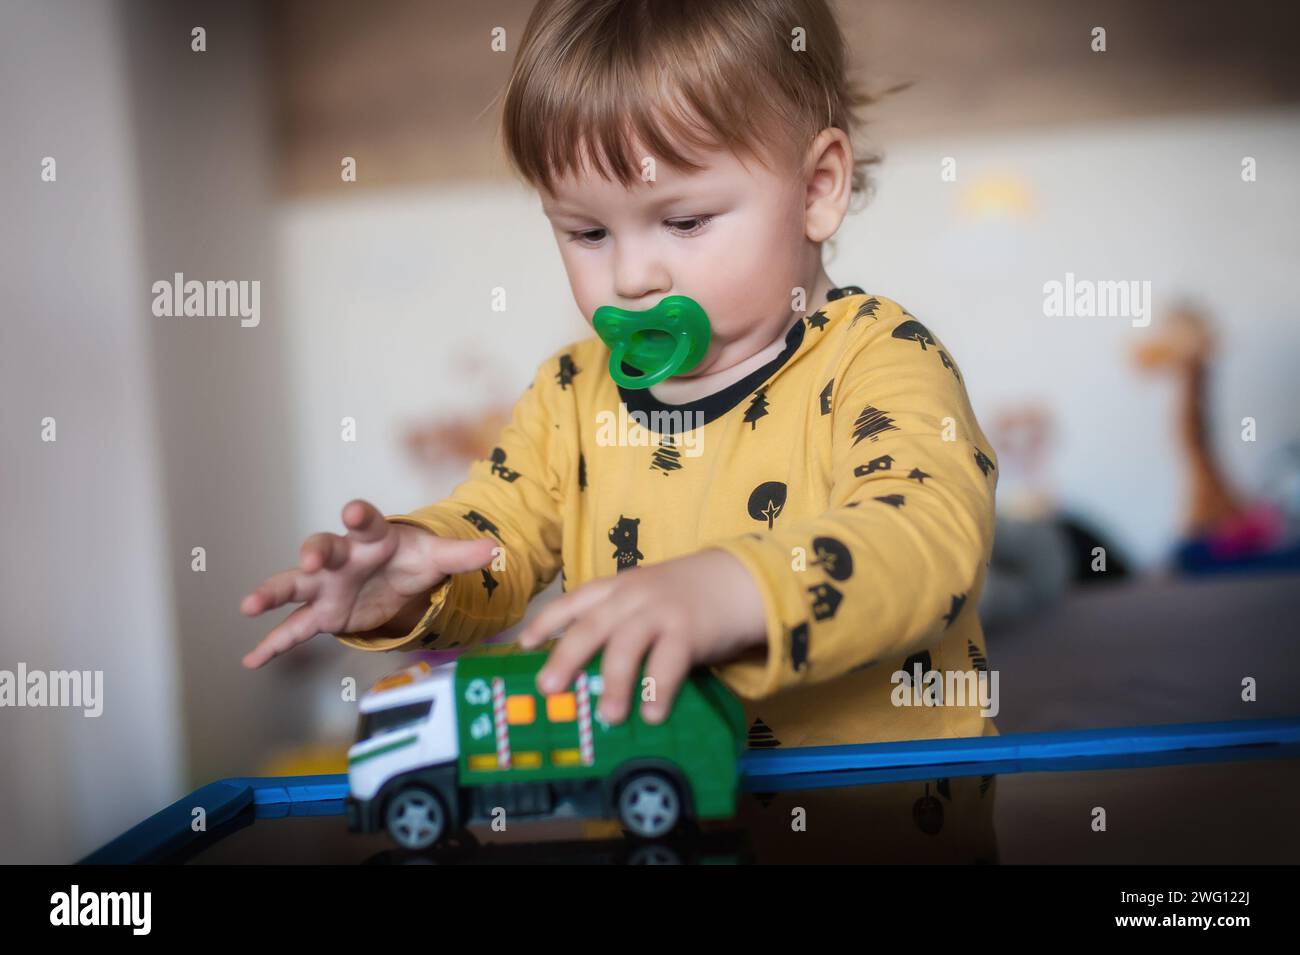 Cute baby boy with pacifier in mouth plays with a small toy truck, driving it around a make-believe world filled with excitement and wonder Stock Photo